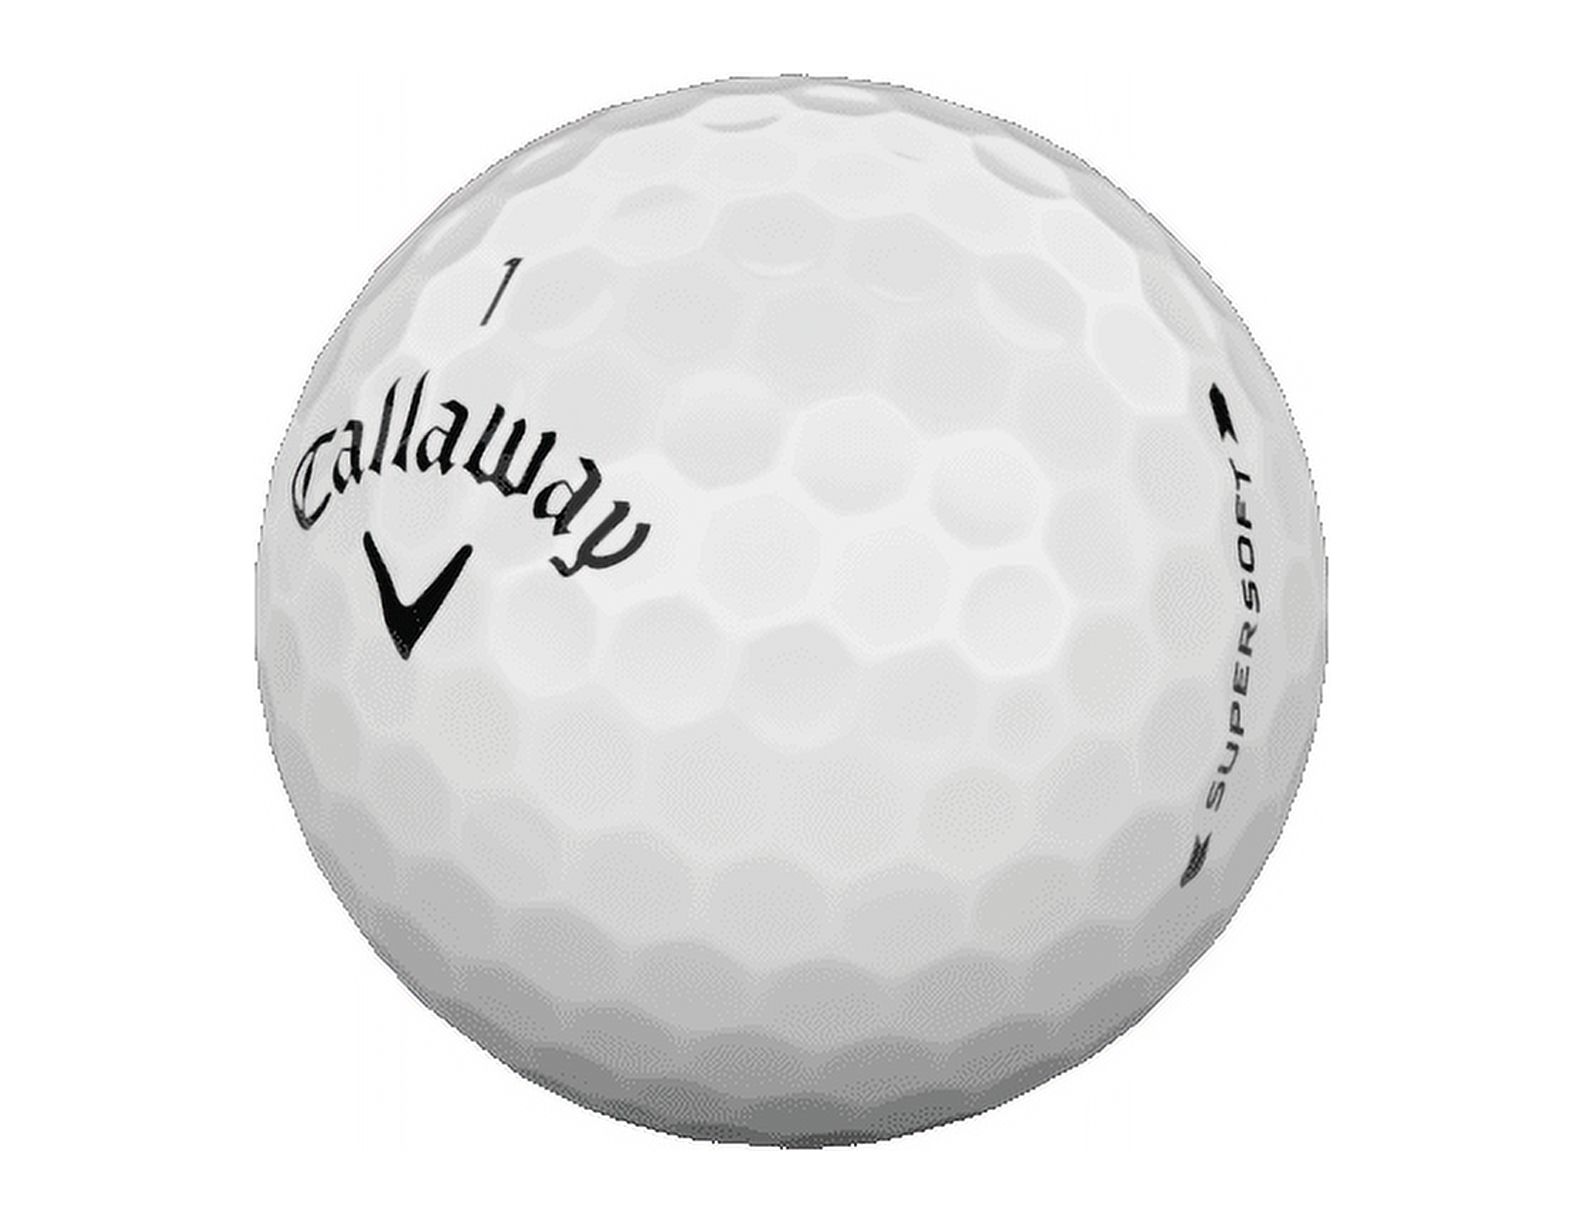 Callaway 2019 Supersoft Golf Balls, White, 12 Pack - image 3 of 3